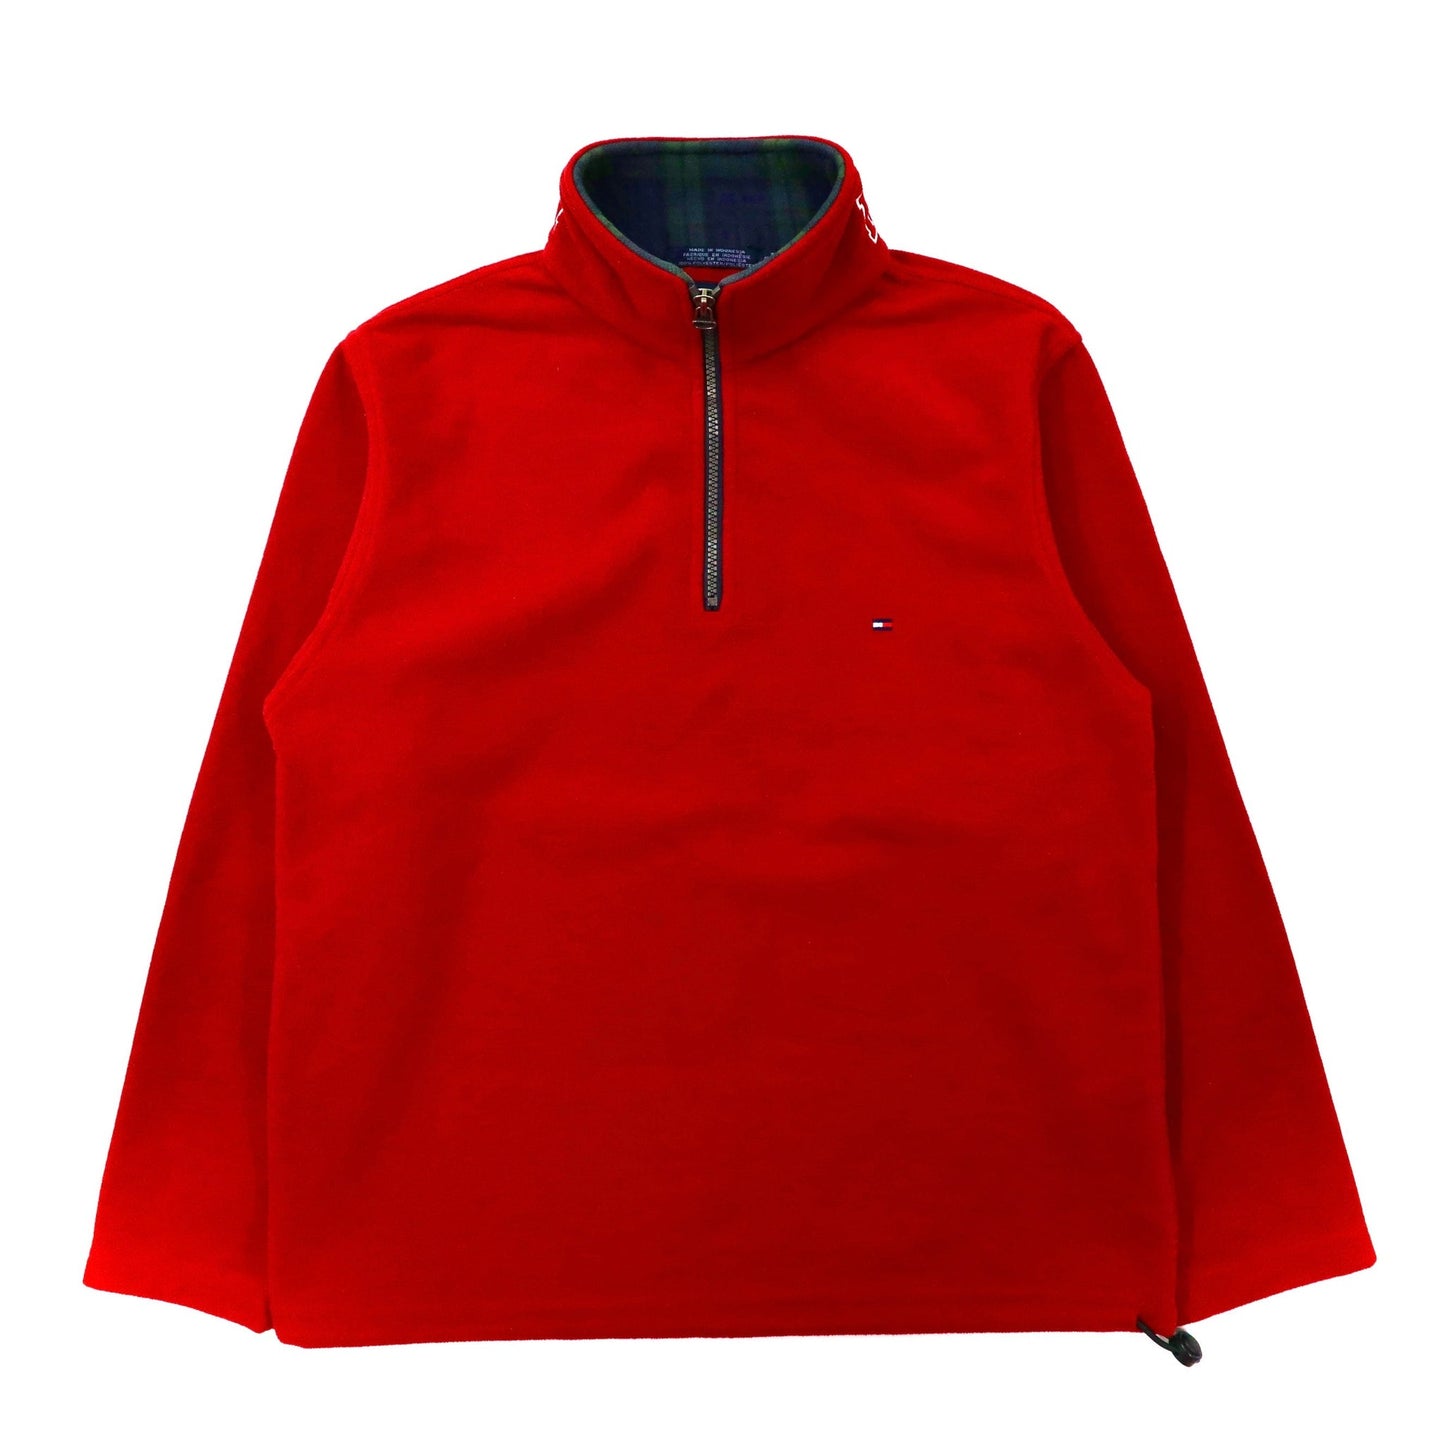 TOMMY HILFIGER Half Zip FLEECE Jacket S Red polyester One Point